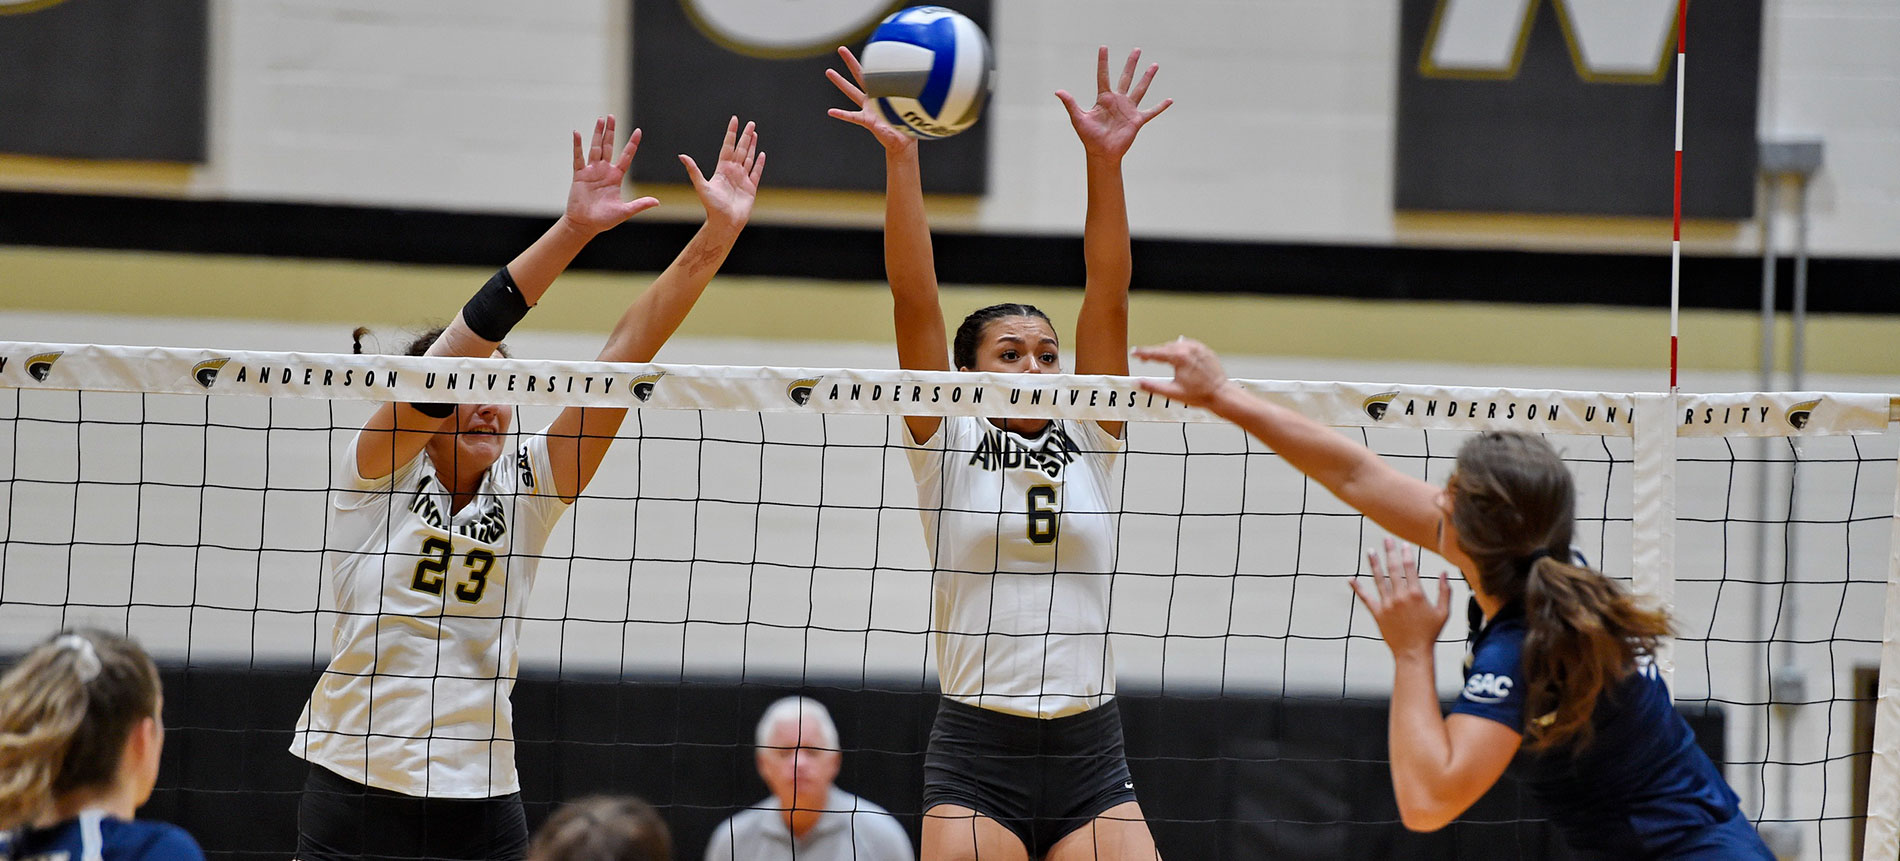 Trojans Open Home Slate by Sweeping Coker and Erskine